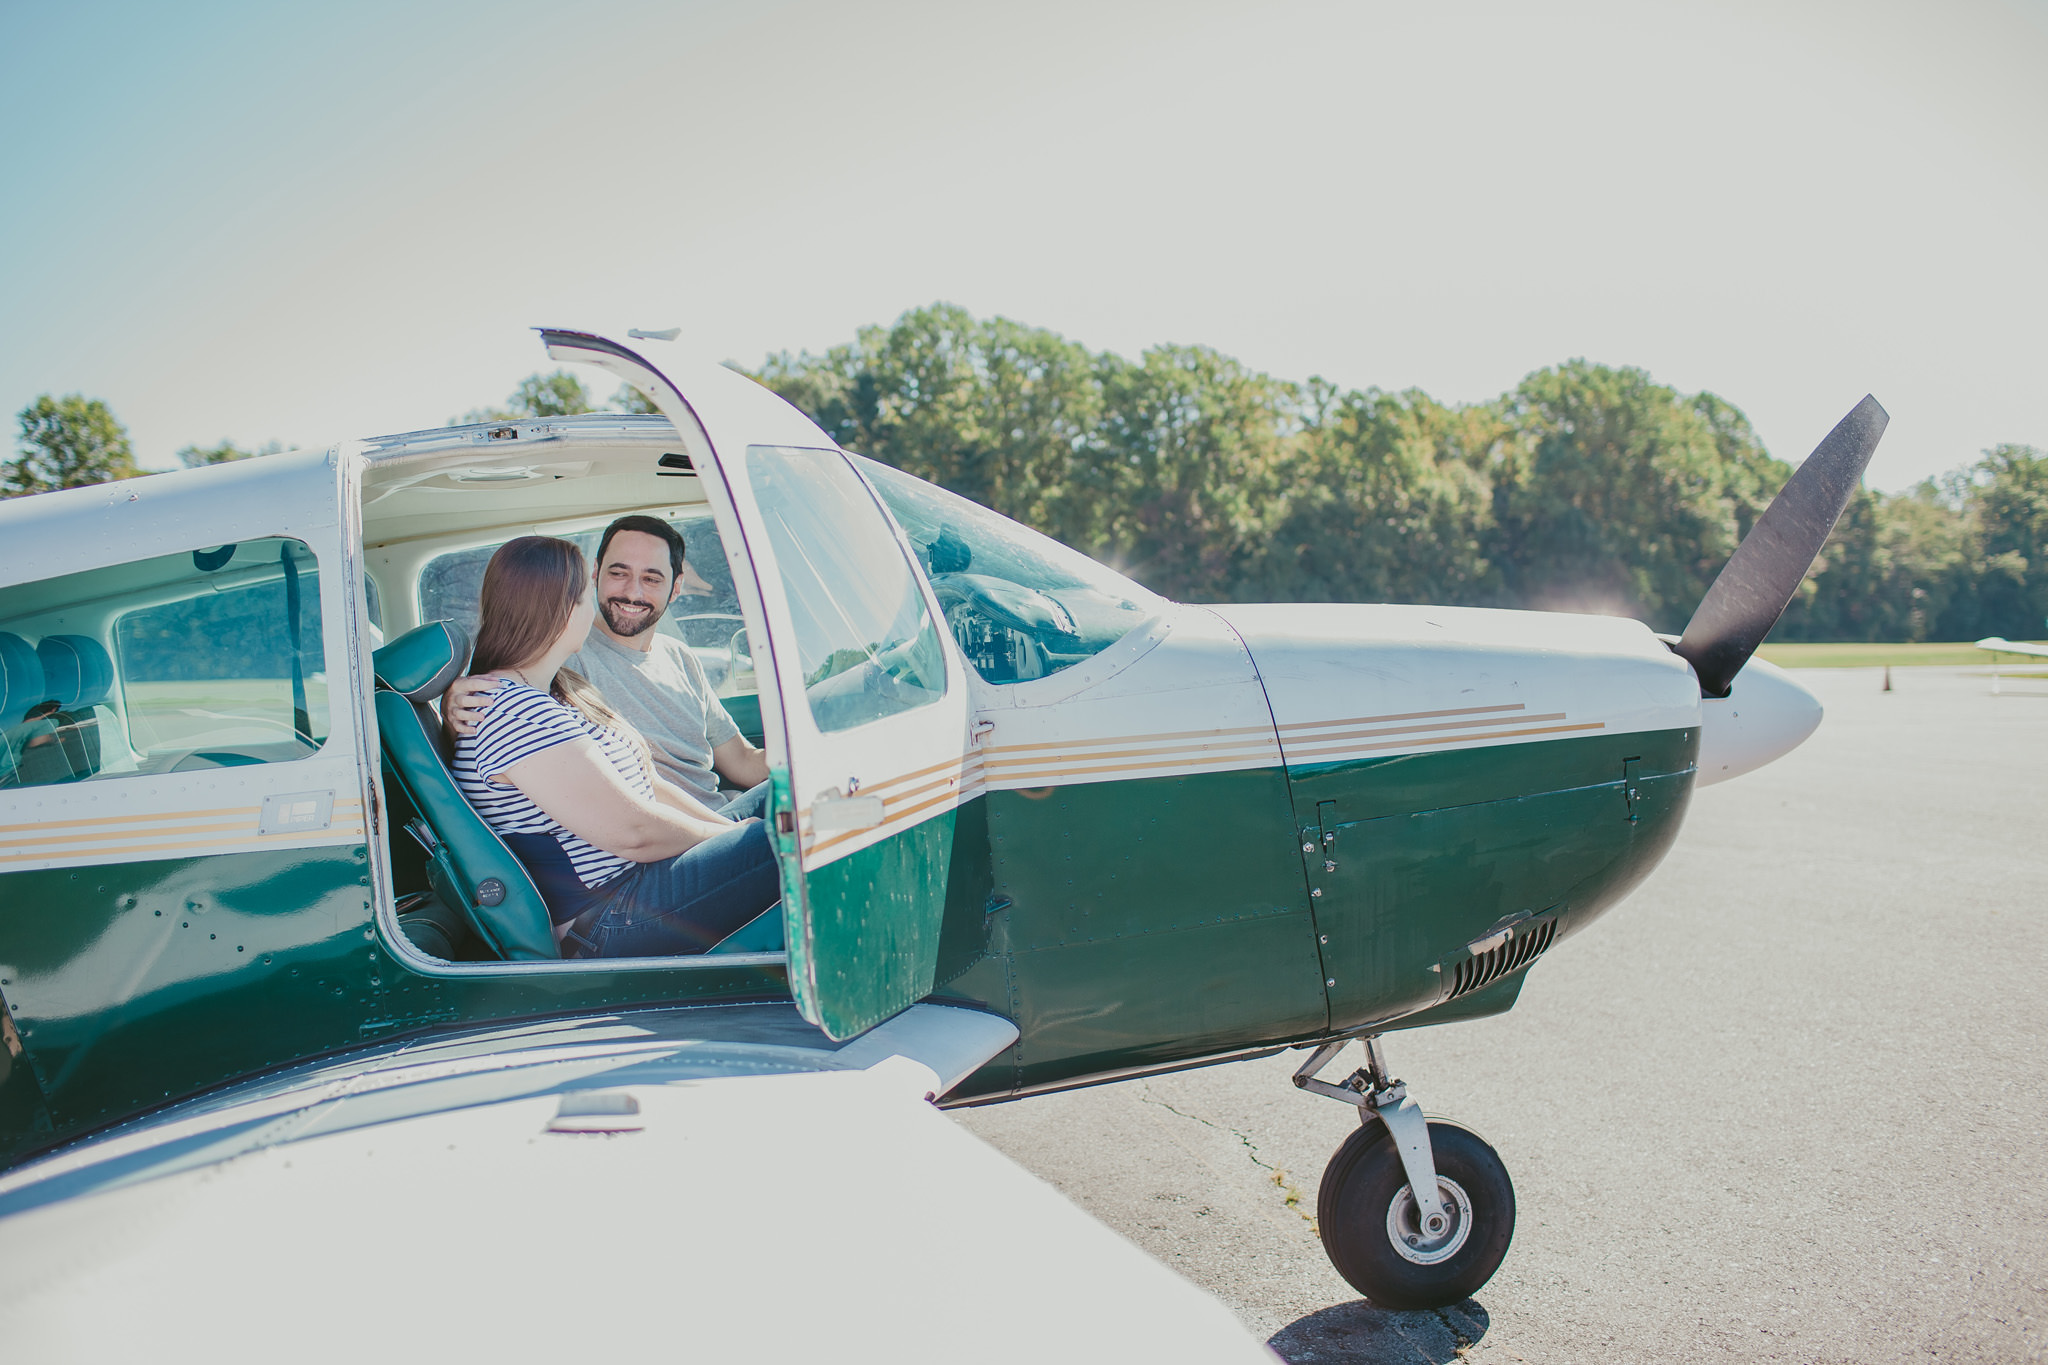 Flying W Airport Medford, NJ Engagement Photography